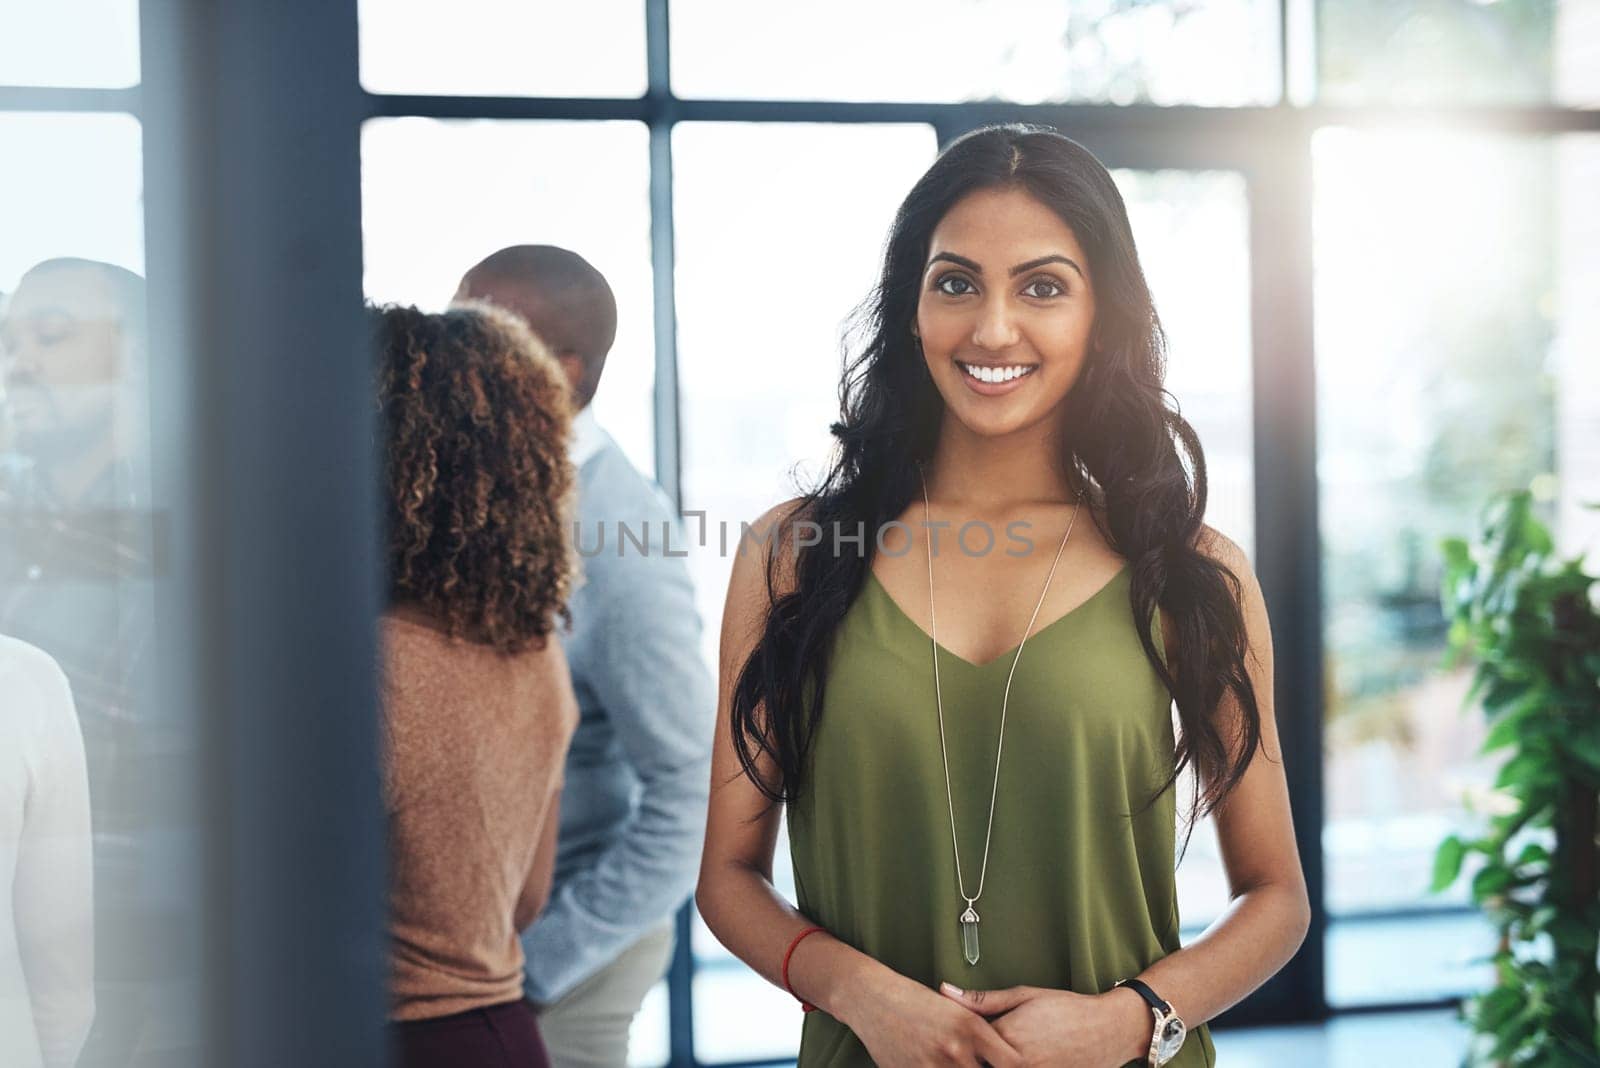 Im part of a great team. Portrait of an attractive young woman standing in the office with her colleagues in the background